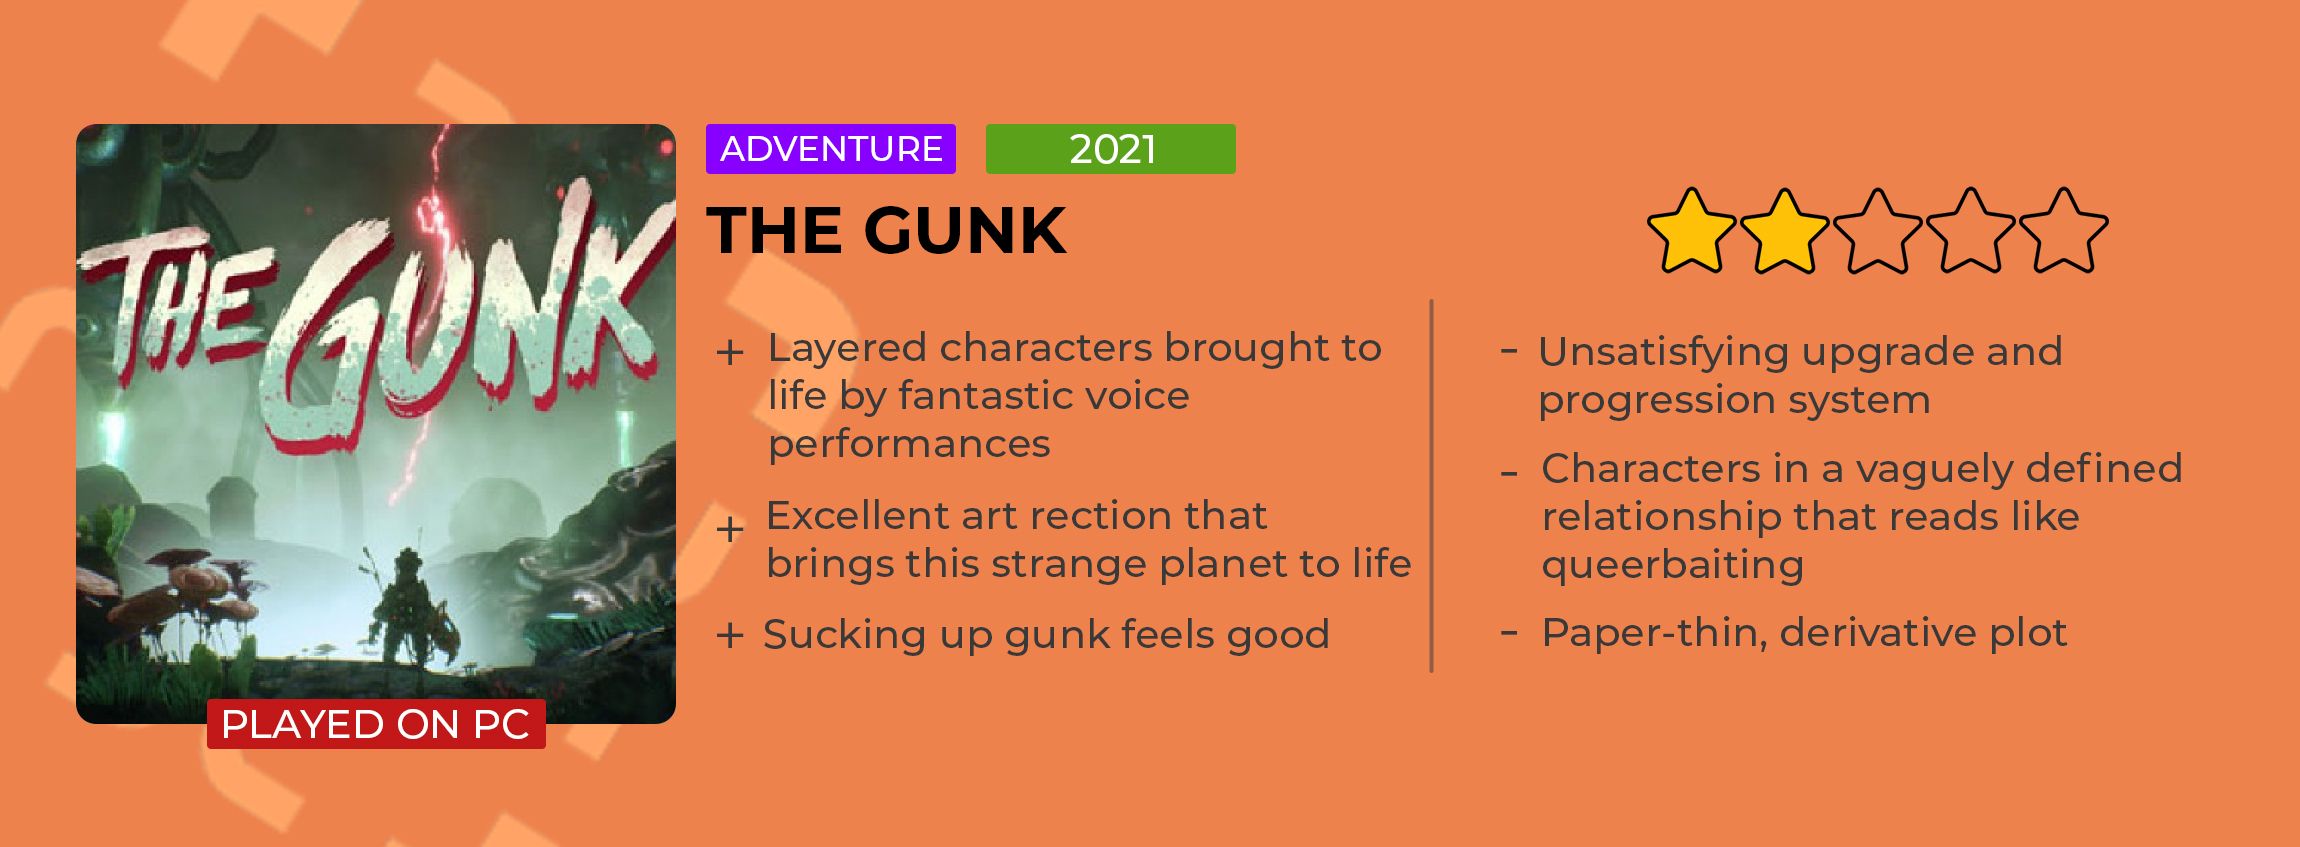 The Gunk Review Card